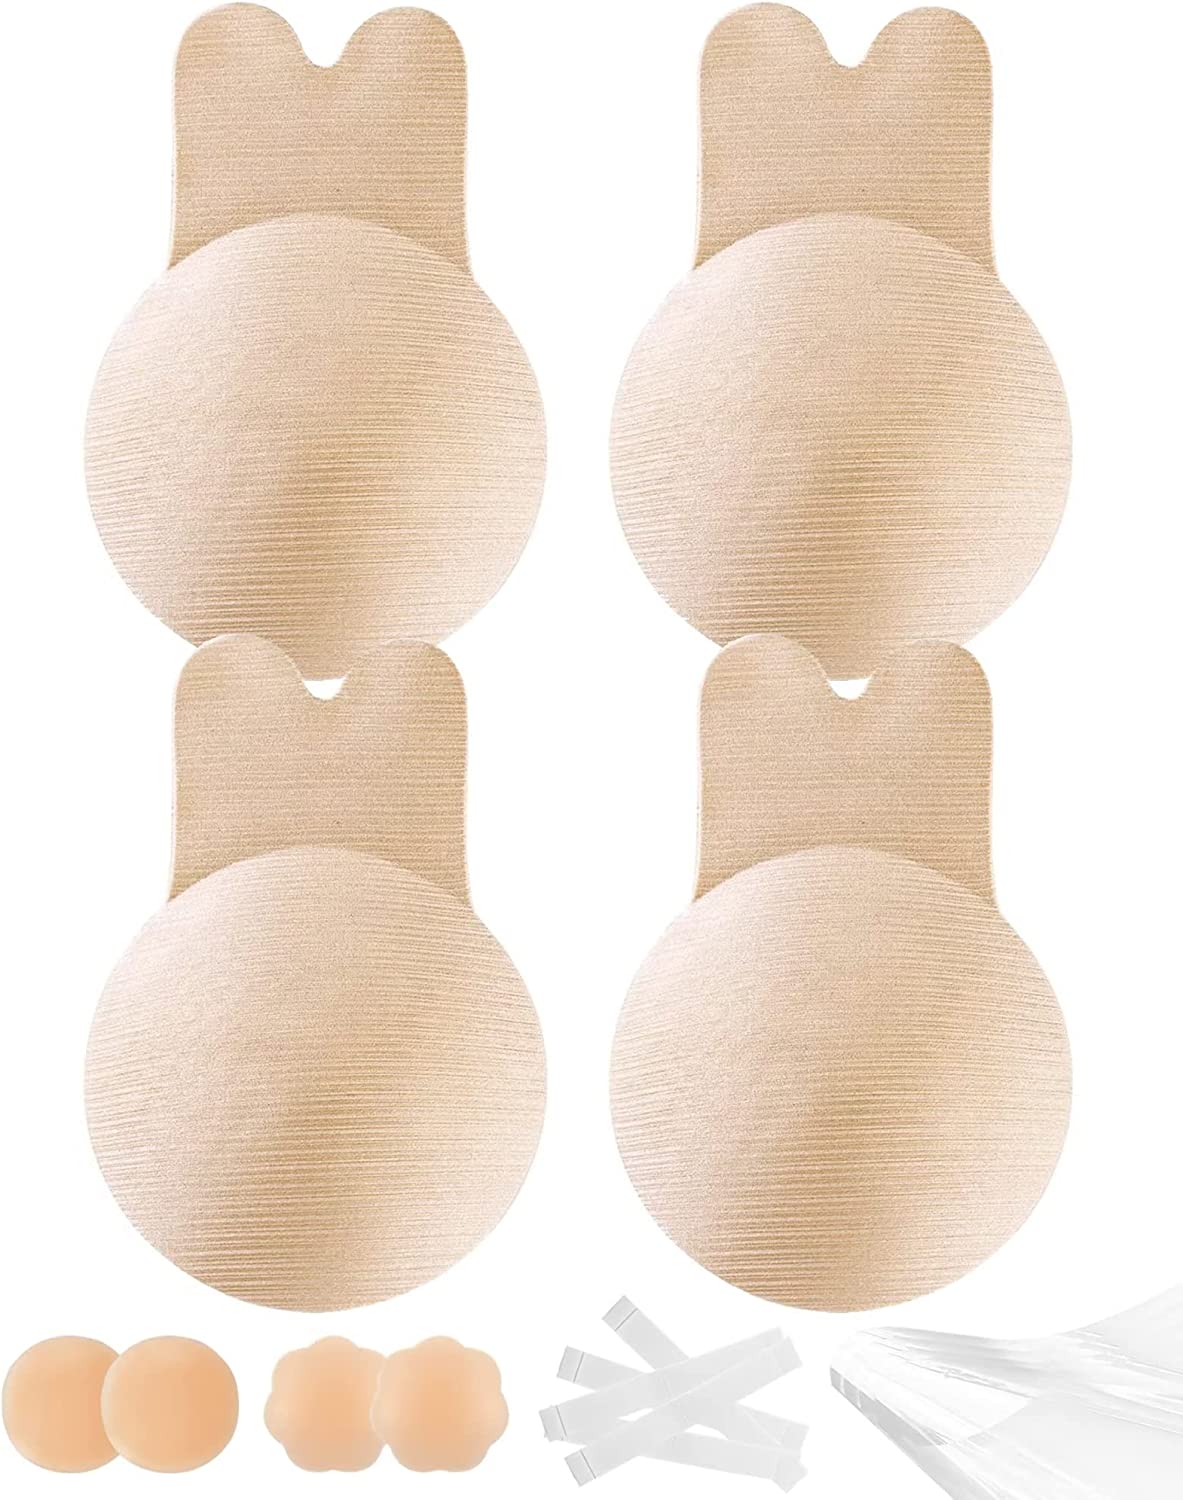 New A/B cup Adhesive Bra Sticky Bra 2 Pair Push Up Sticky Boobs for Women Invisible Silicone Bras for Backless Strapless Dress